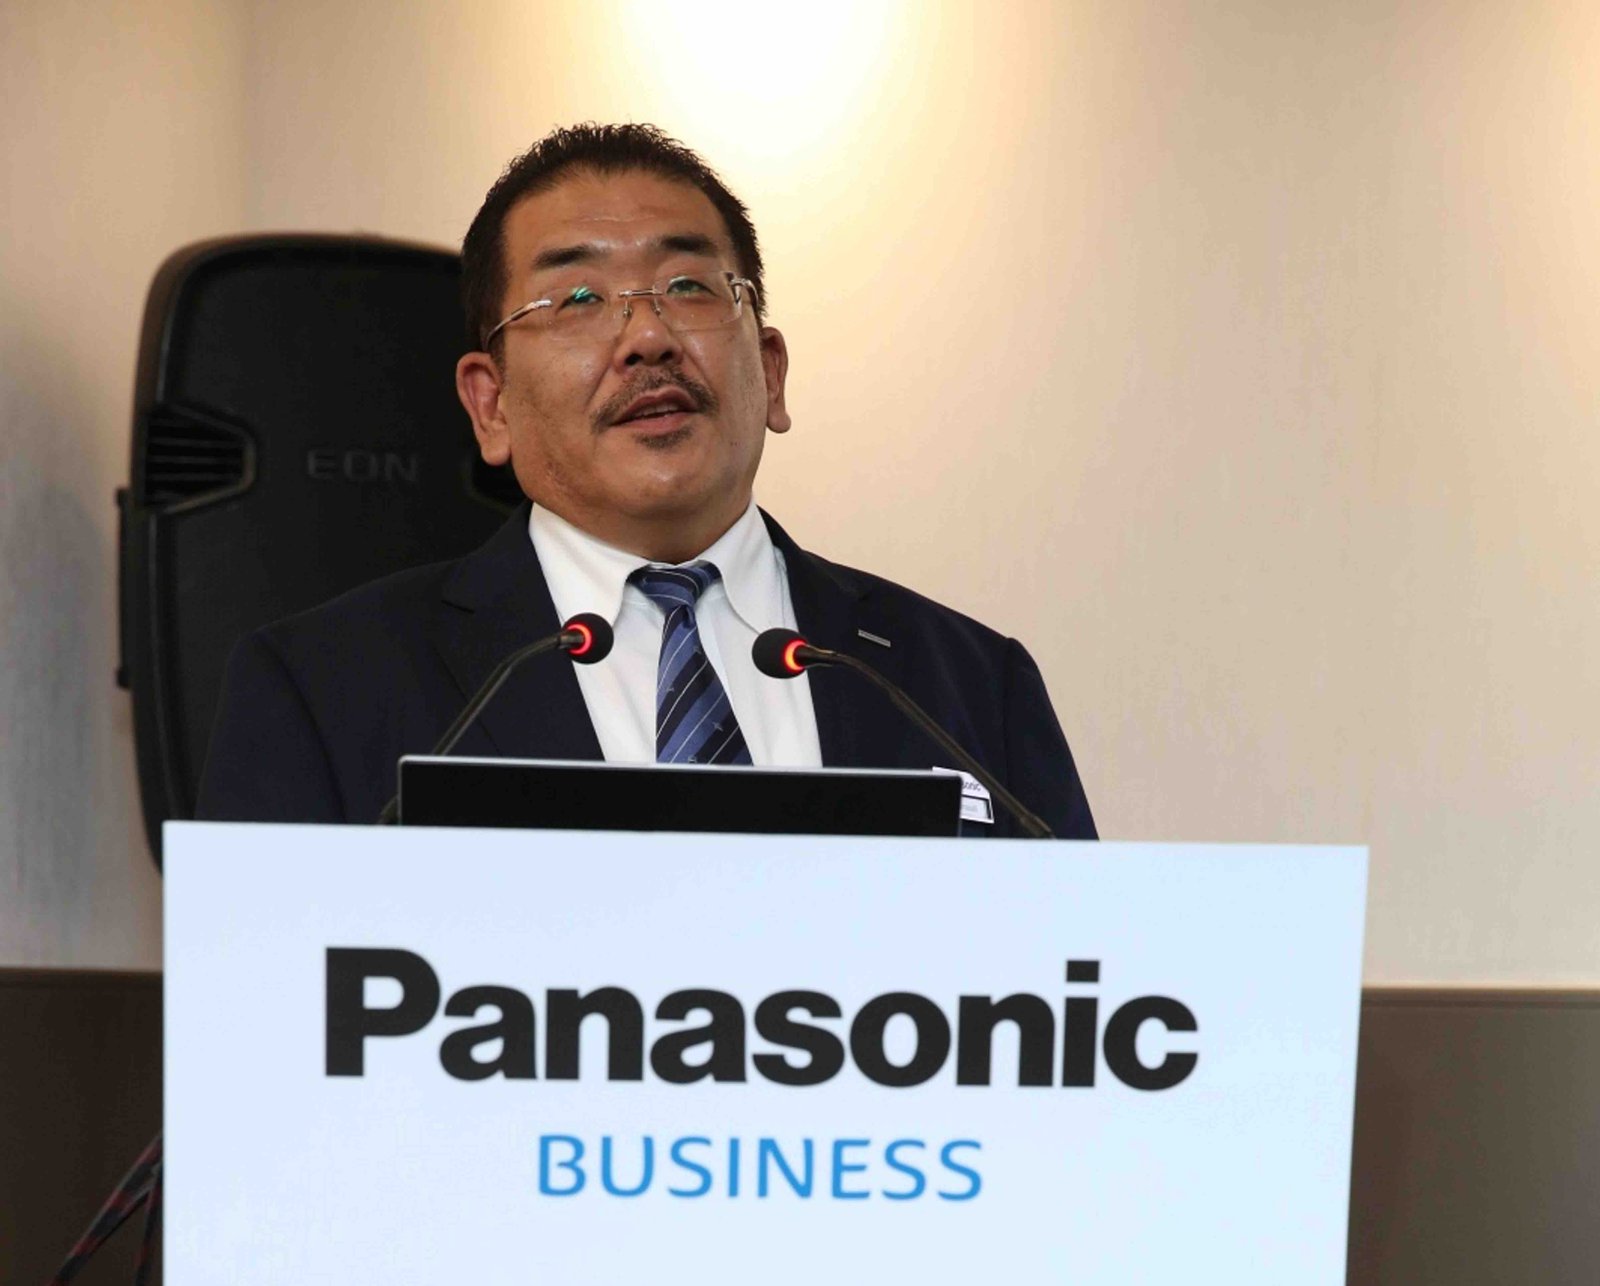 Panasonic to Show Off new Business Solutions at GITEX Technology Week 2017